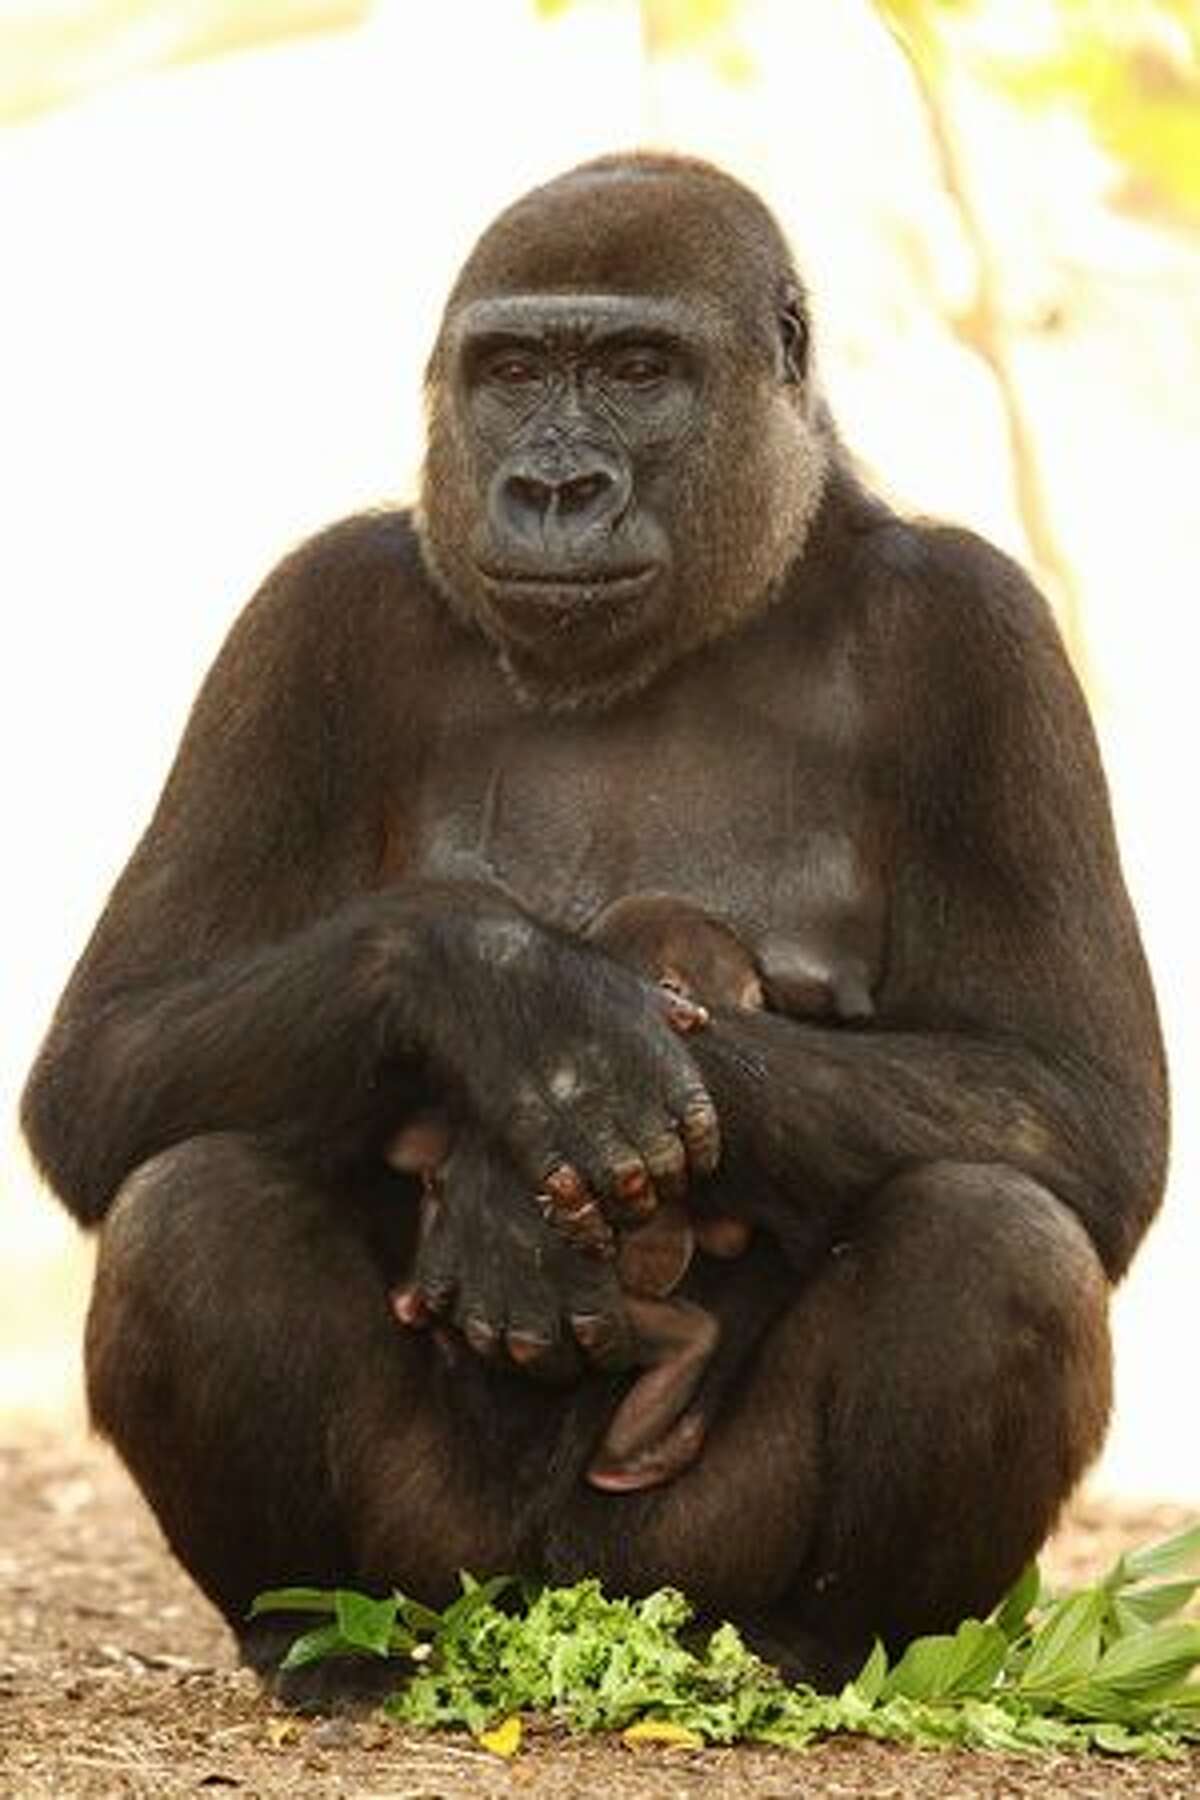 SYDNEY, AUSTRALIA - Baby "Kipenzi" sits in her mother "Kriba's" arms at the Taronga Zoo on Tuesday in Sydney, Australia. The baby western lowland Gorilla, "Kipenzi" was born to mother "Kriba" and father "Kibabu" on January 15th. Western lowland Gorillas are on the critically endangered list.